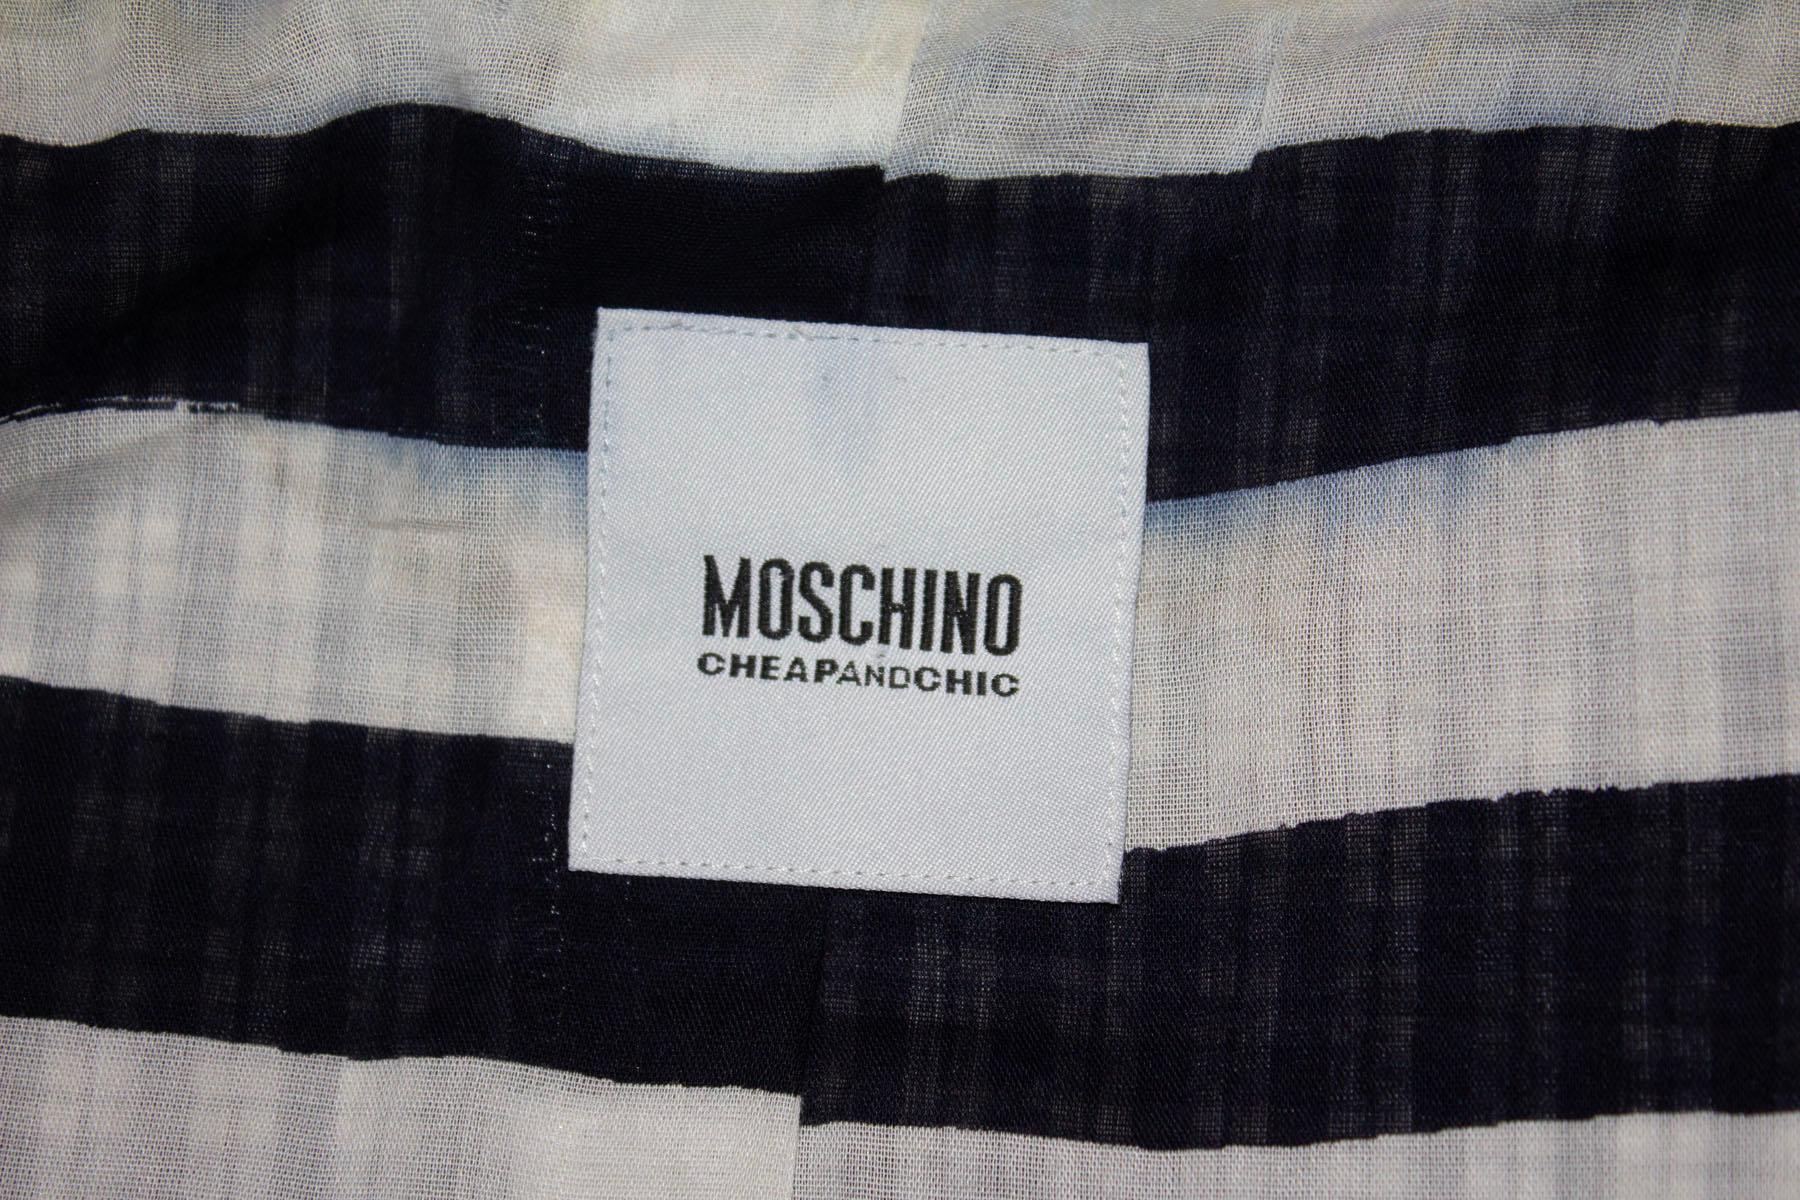 A fun jacket for Summer by Moschino . In a blue and white cotton seersucker, the jacket has an attractive collar and fun stripe lining.  It has a three button from opening, and peplum/frill detail at the lower front. 
Measurements: Bust up to 38'',